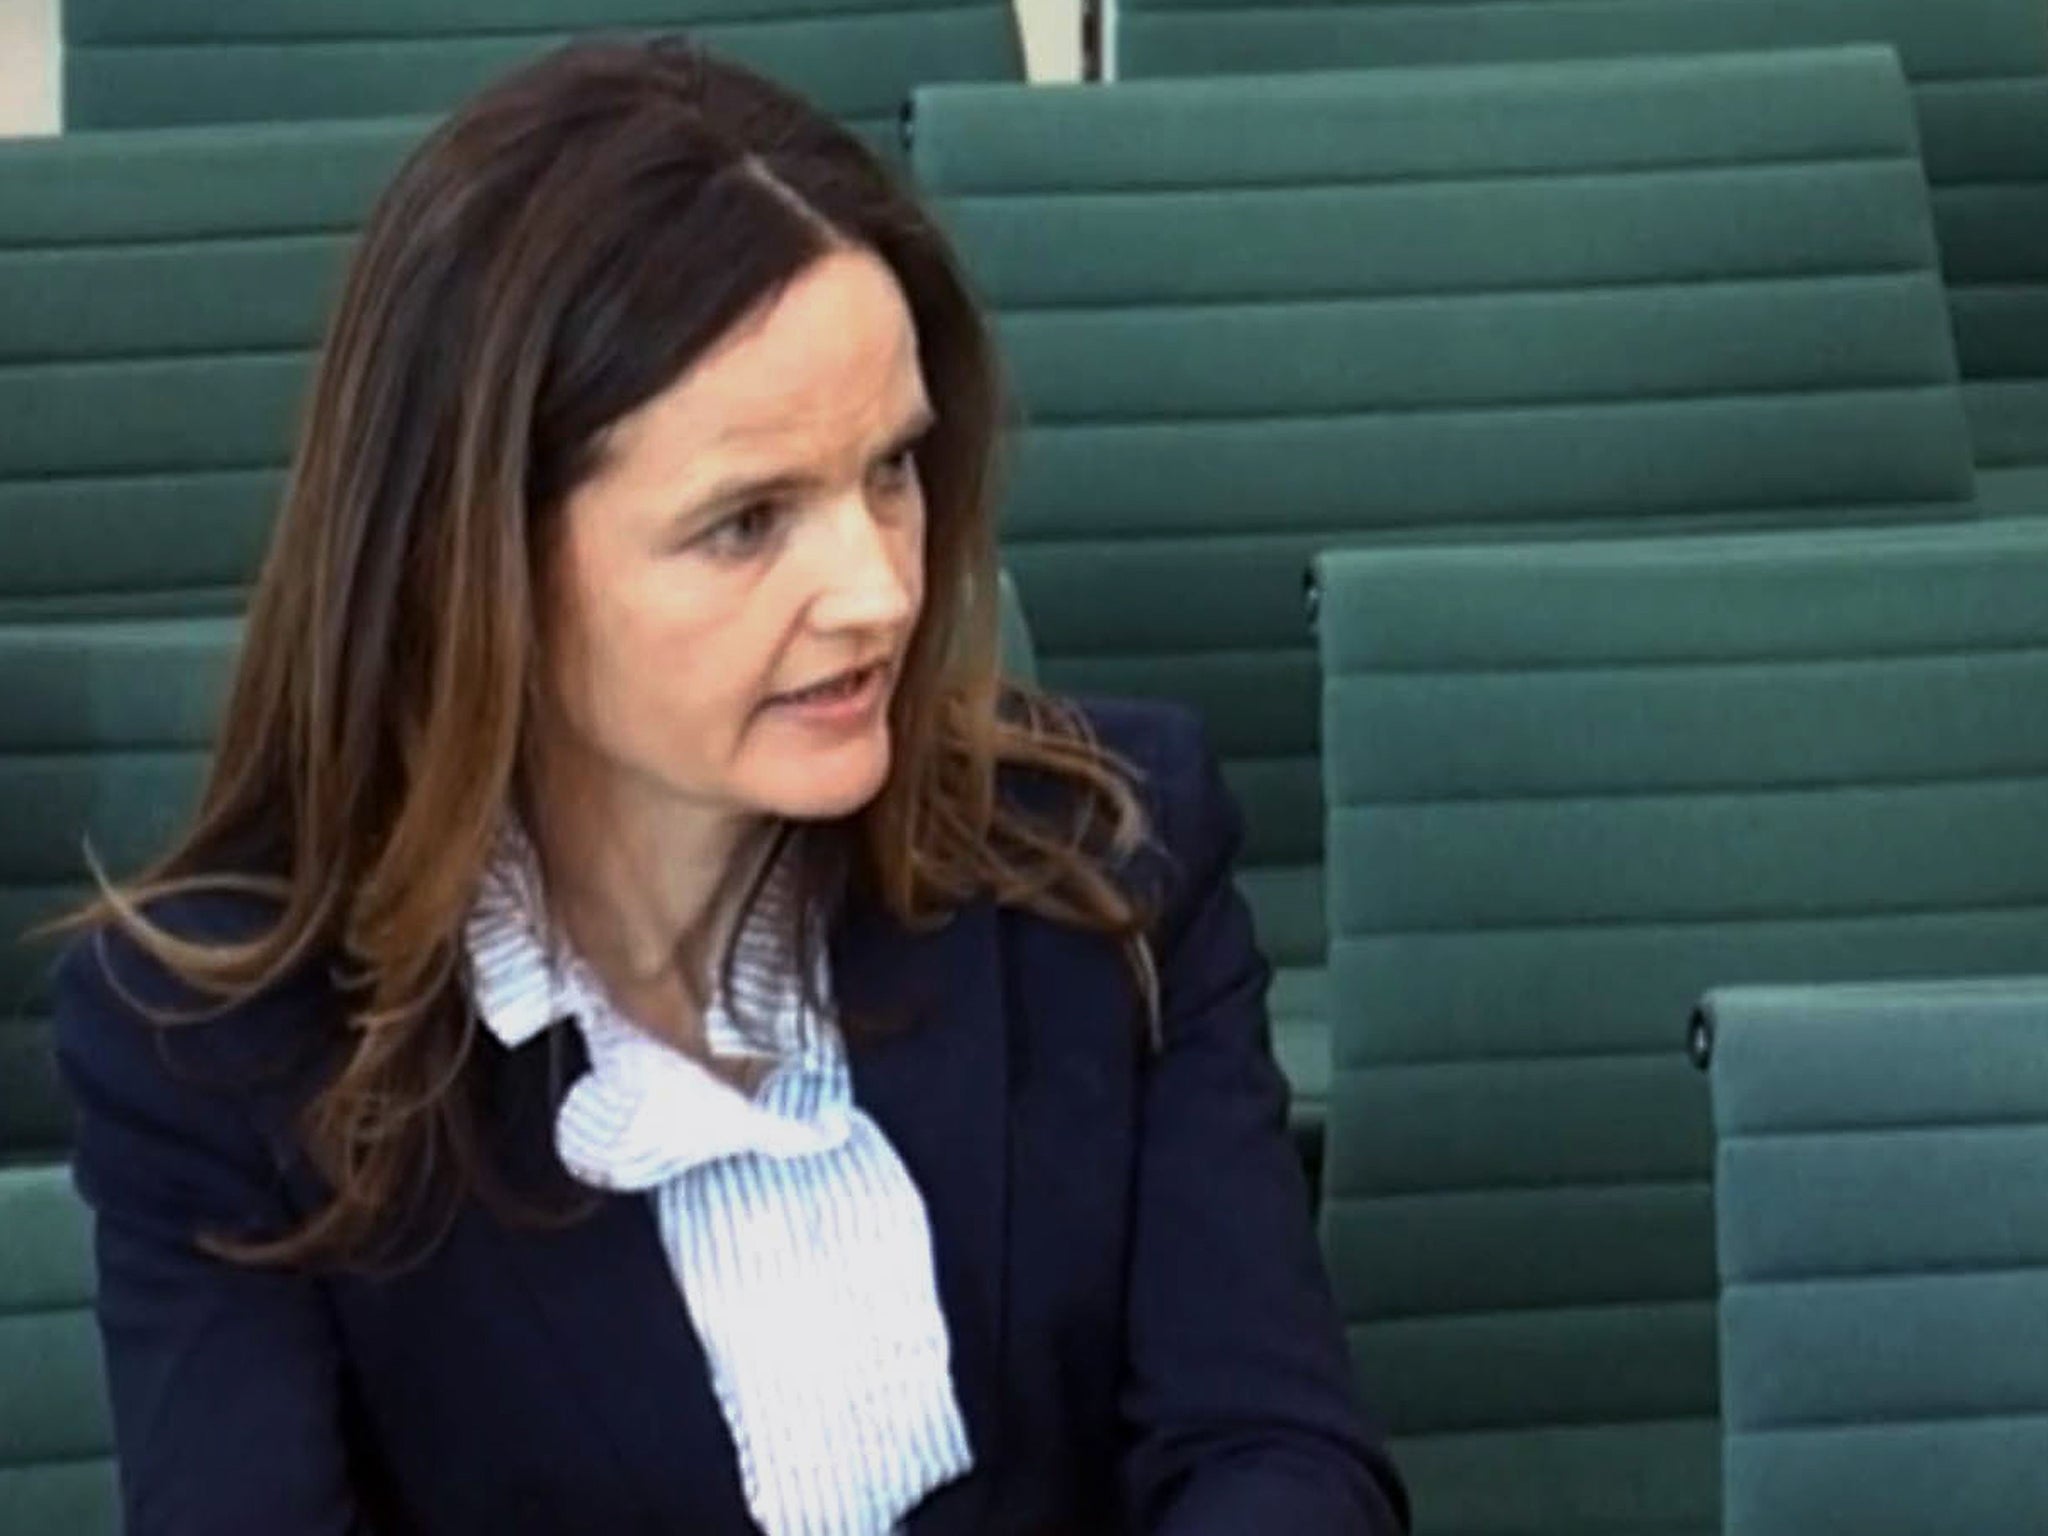 Charlotte Hogg told the Treasury Committee the Bank's QE programme had been effective